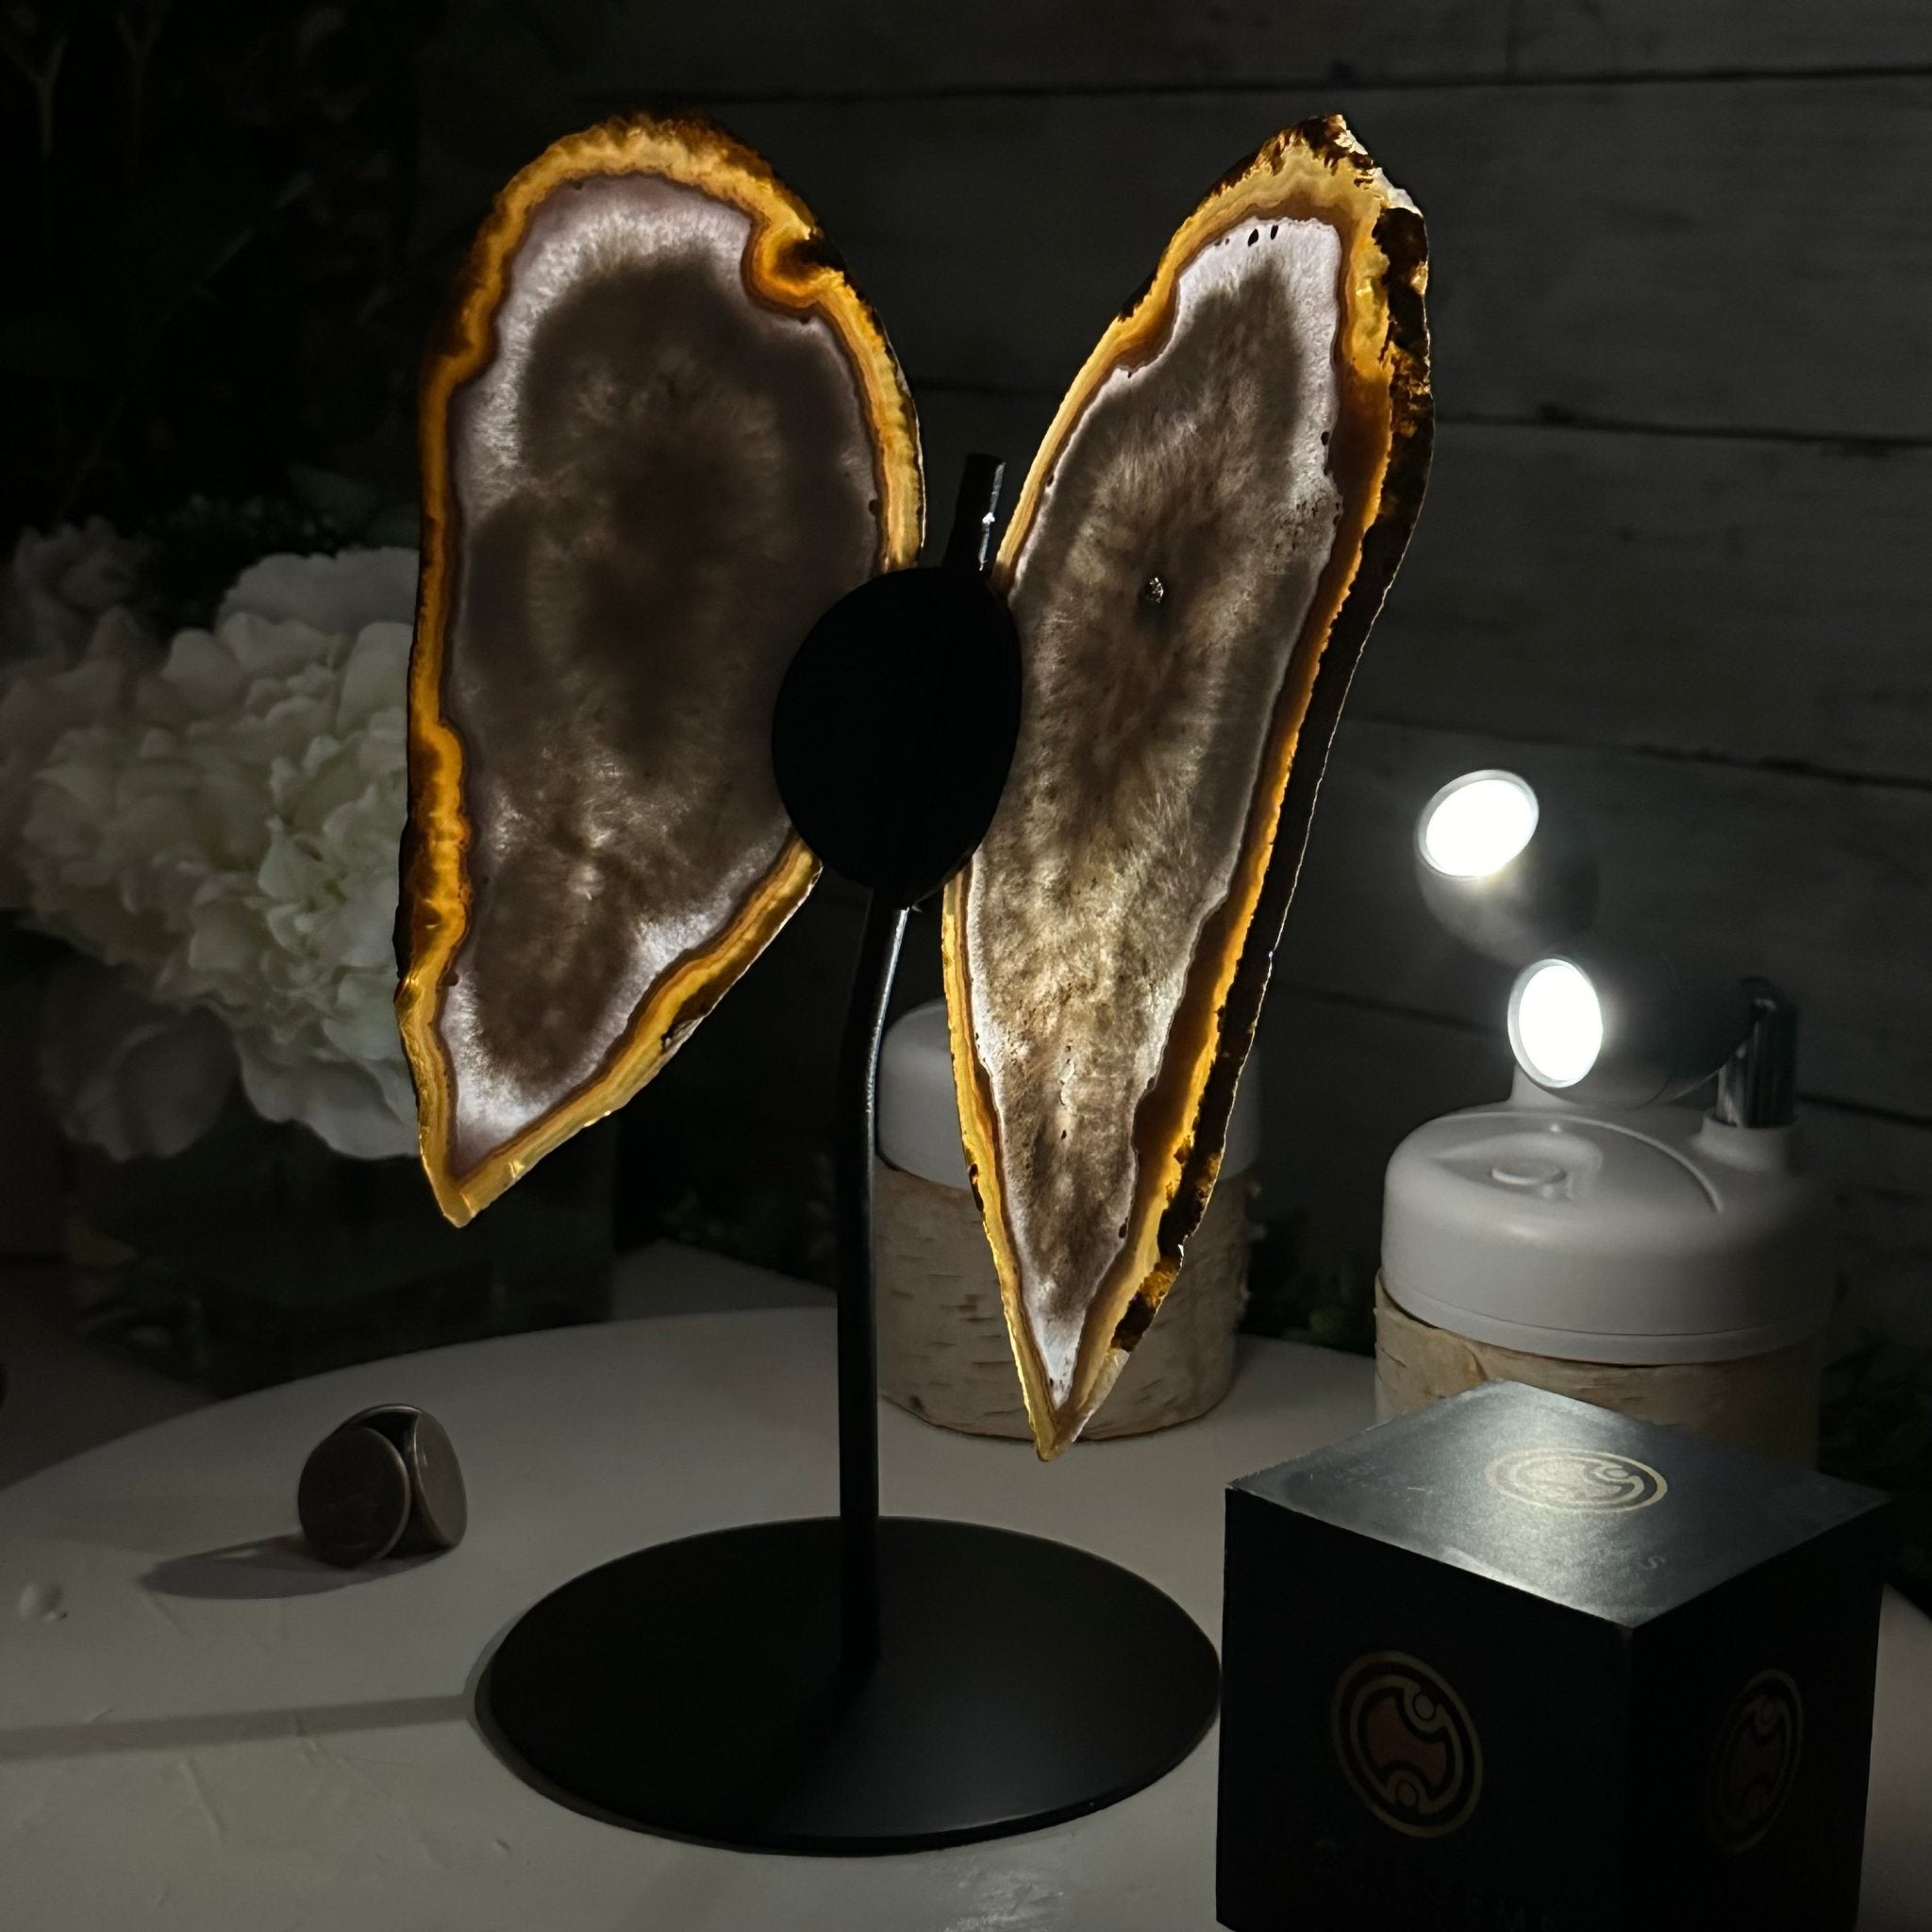 Natural Brazilian Agate "Butterfly Wings", 9.8" Tall #5050NA-103 - Brazil GemsBrazil GemsNatural Brazilian Agate "Butterfly Wings", 9.8" Tall #5050NA-103Agate Butterfly Wings5050NA-103